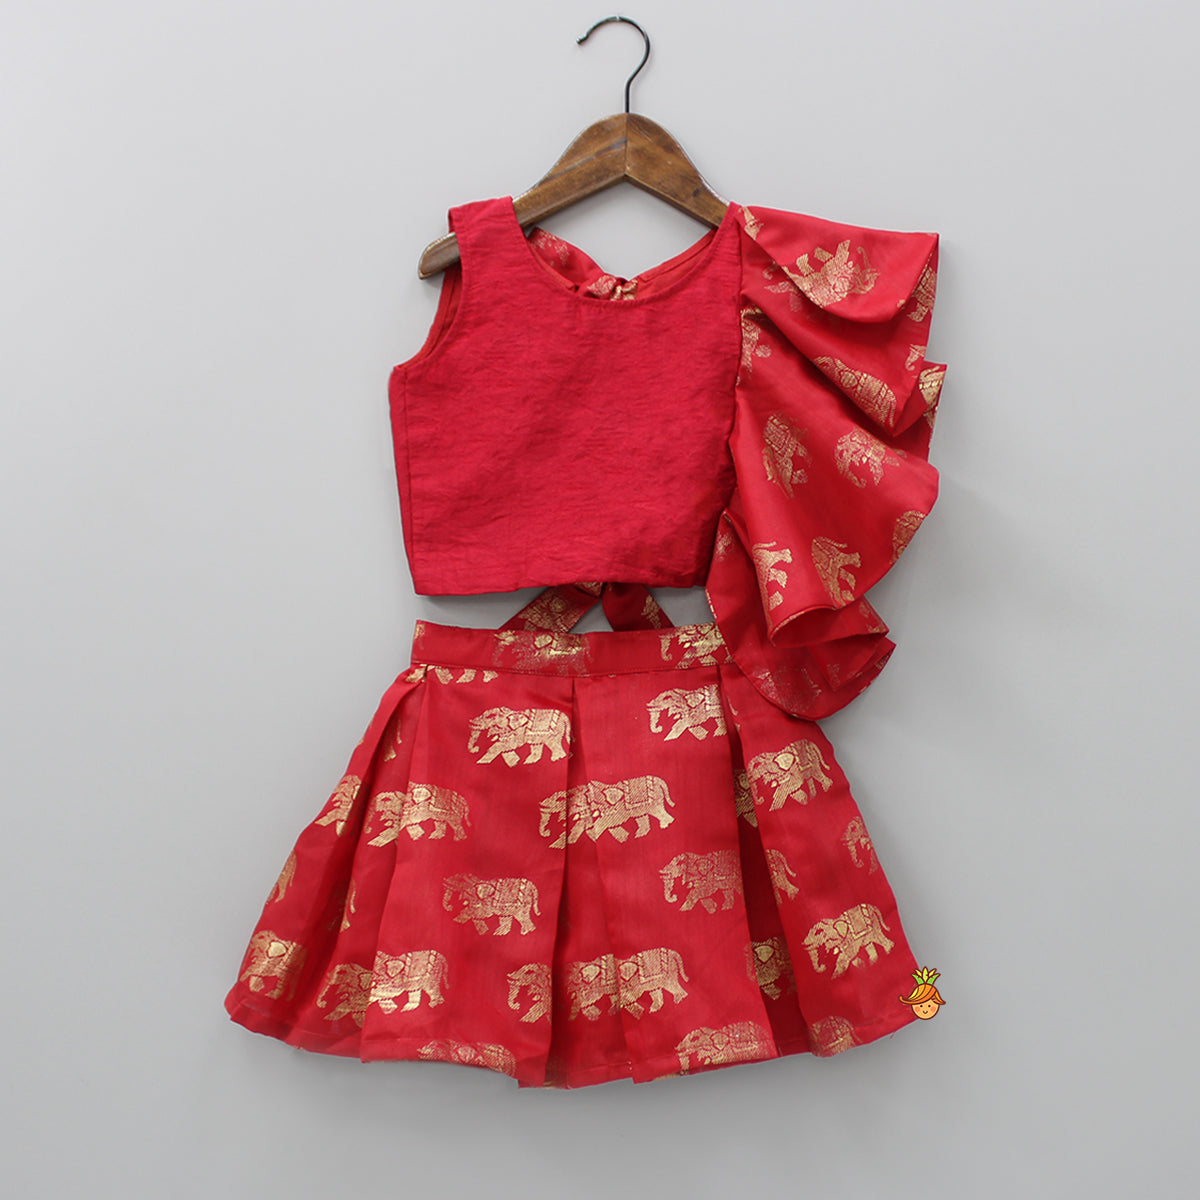 Stylish Red Top And Skirt With Elephant Print